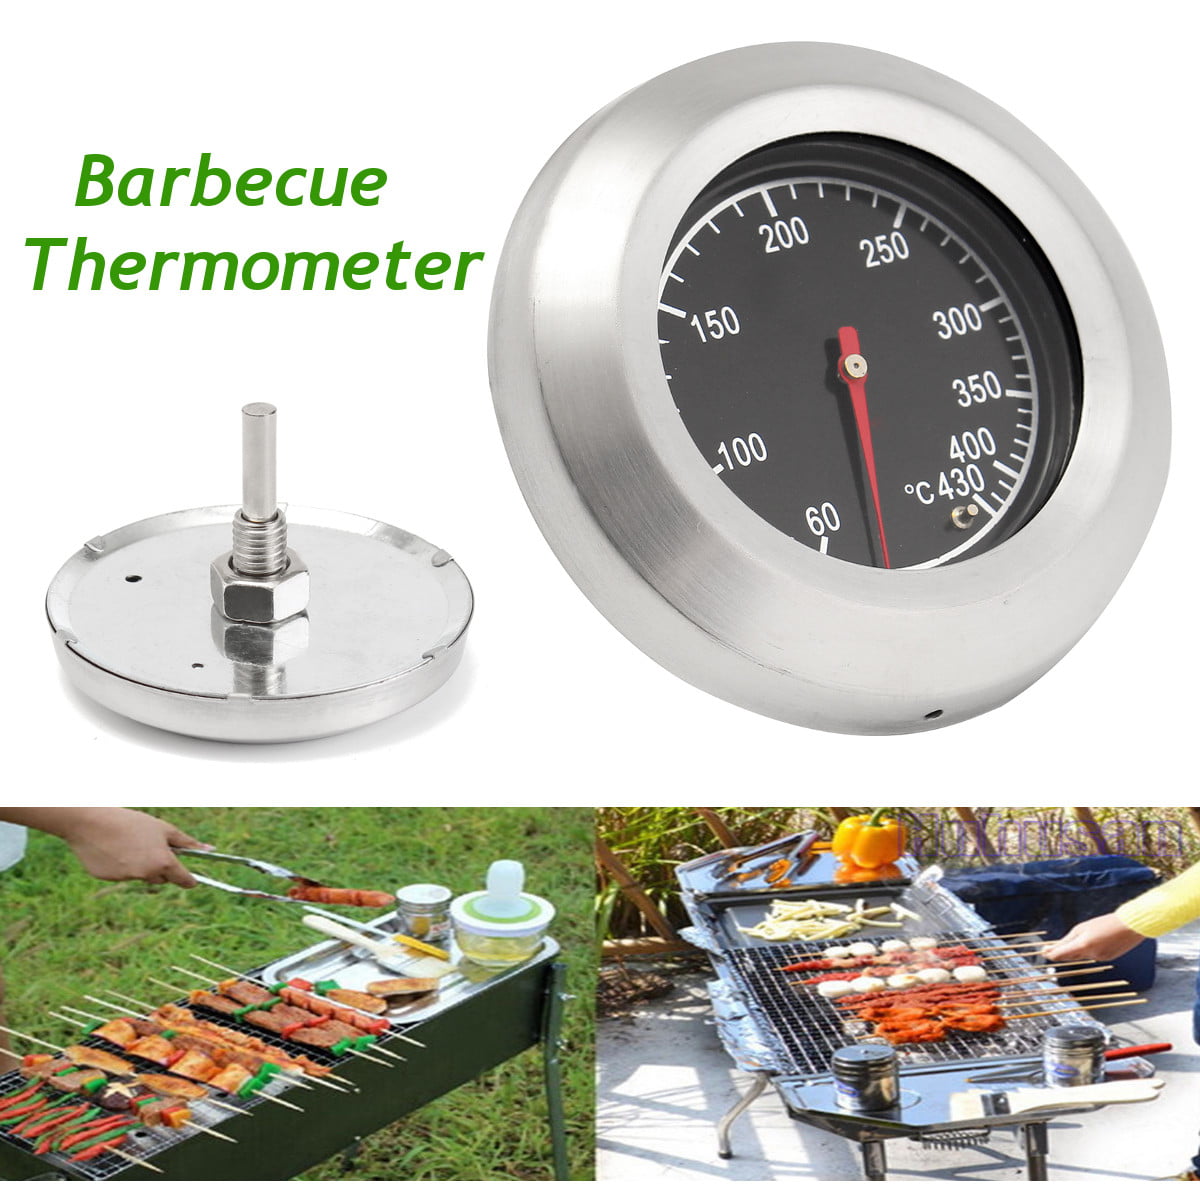 Thermometer Grill Smoker Bbq Gauge Barbecue Temperature Stainless Steel 10-400C 